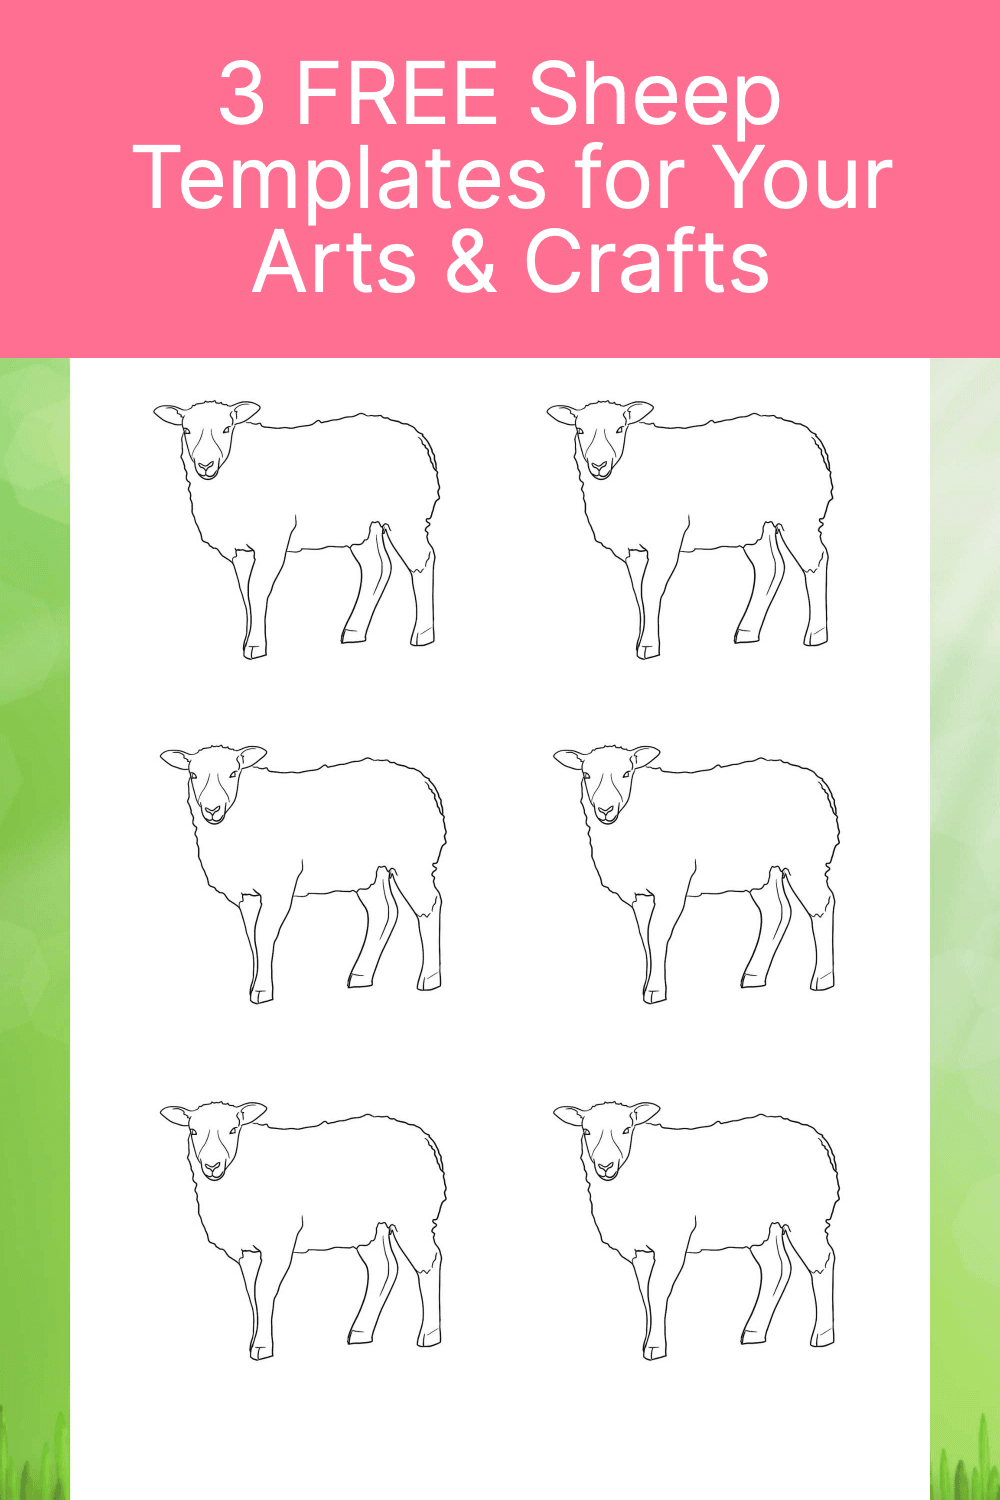 3-free-sheep-templates-for-your-arts-crafts-artsydee-drawing